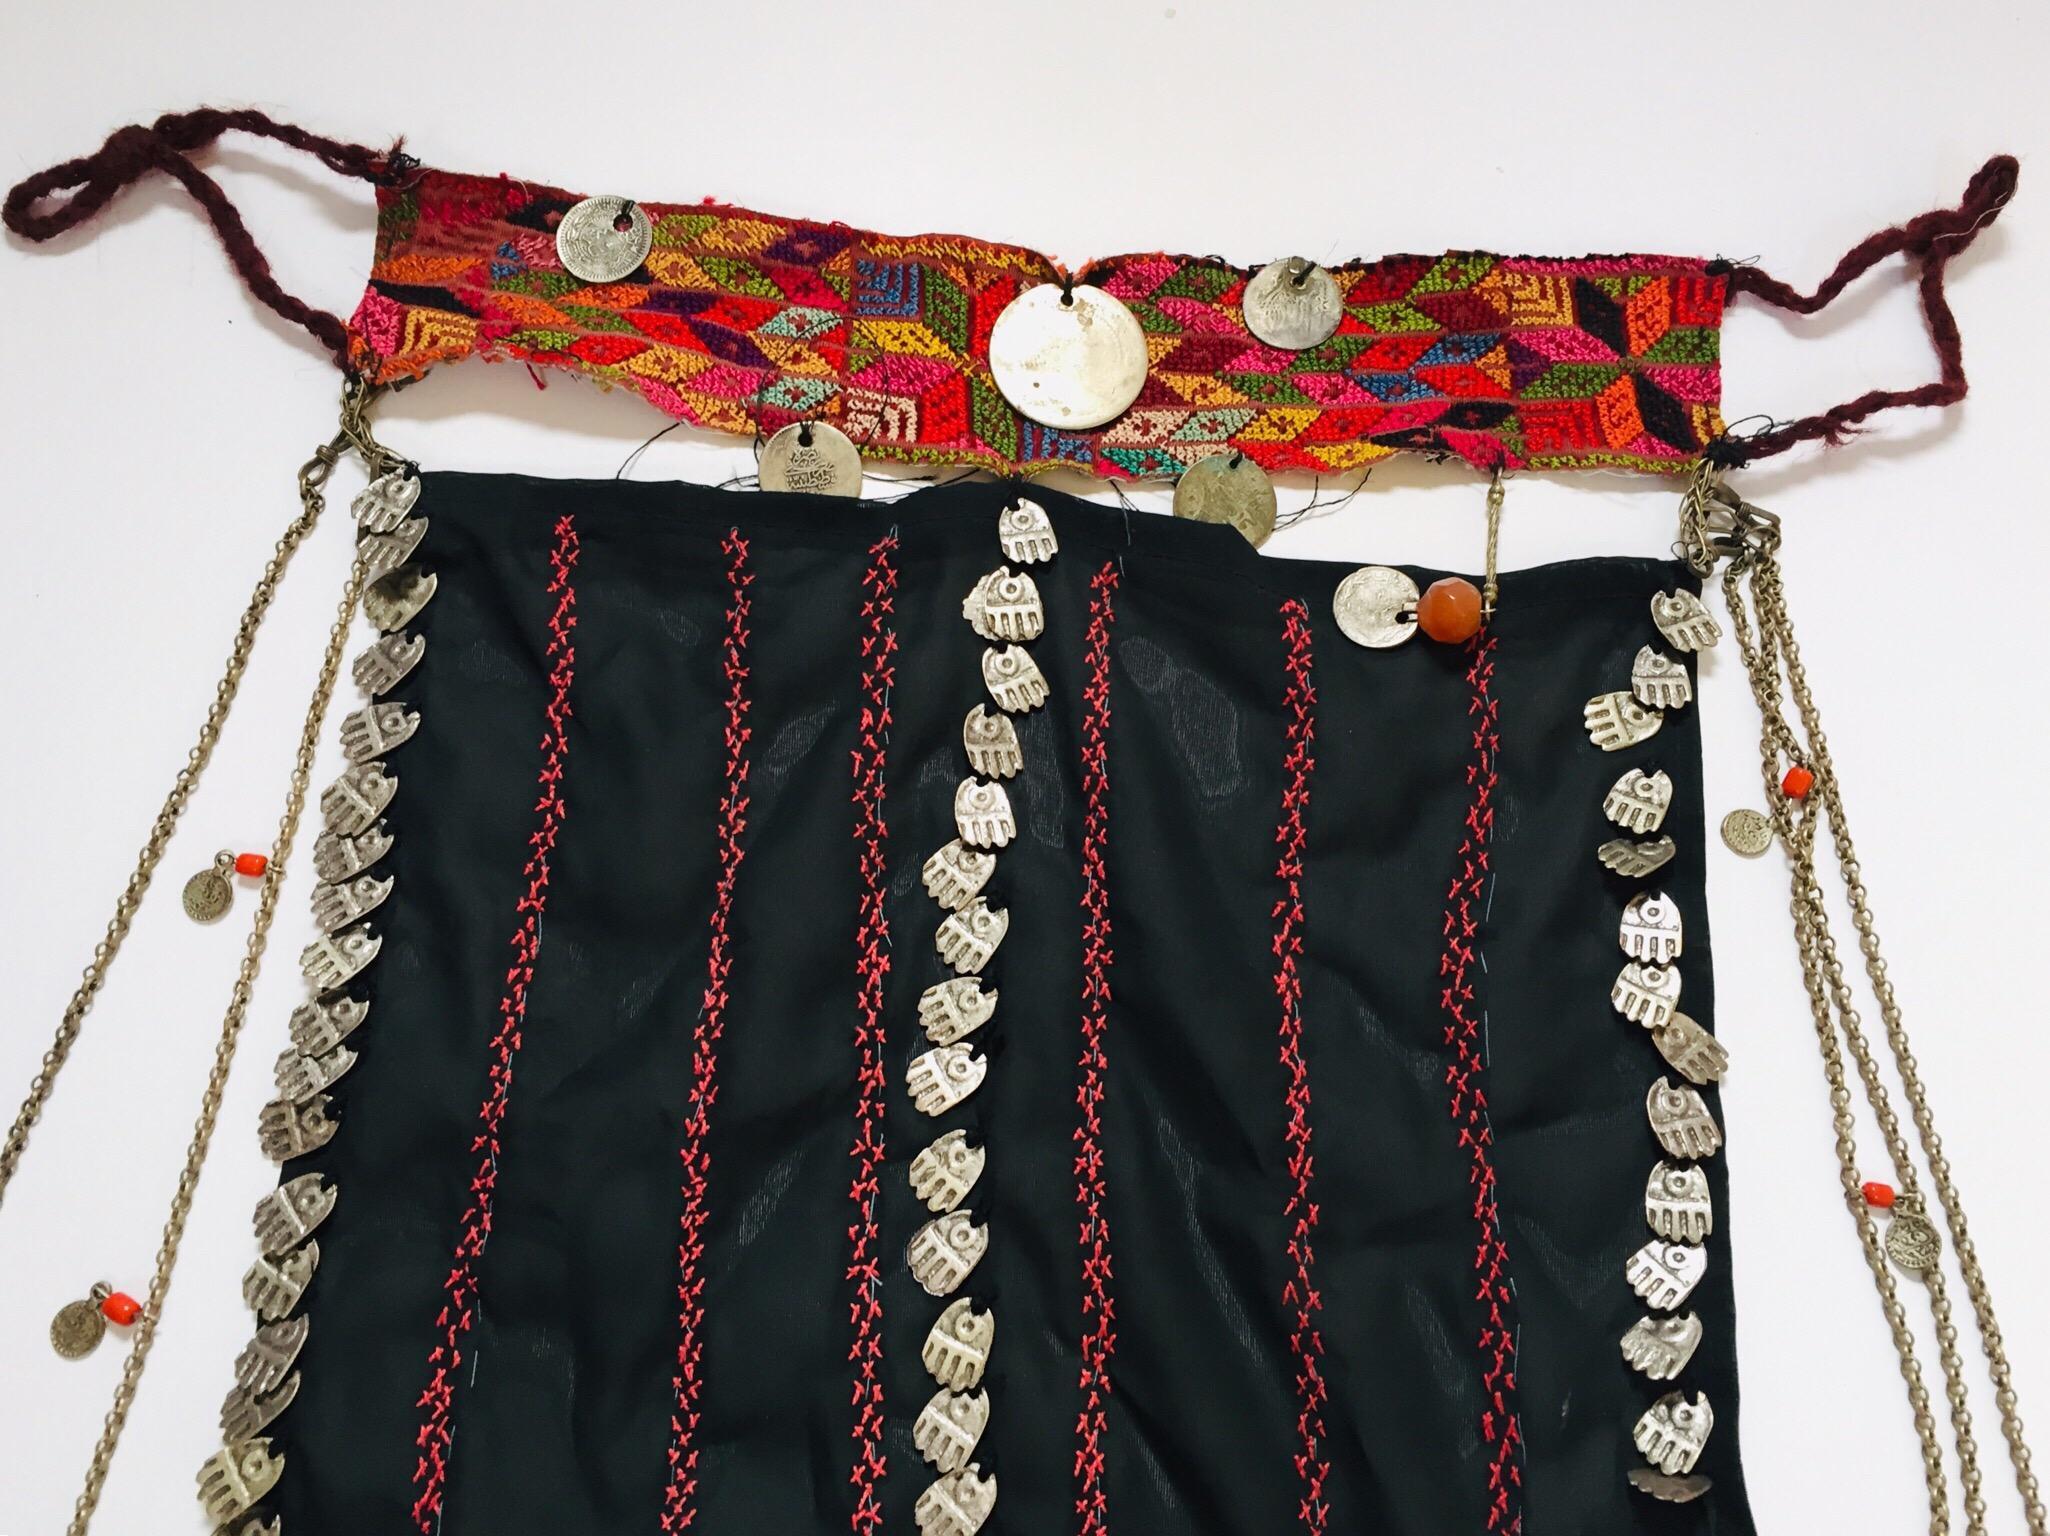 Middle Eastern, Palestinian, Egyptian Bedouin women face veil, from the Bedouin tribes of the Sinai Desert.
Vintage or semi antique collector ethnic folk art textile.
An amazing Niqab, Negev Bedouin veil from Palestine.
Worked on a base of tiny silk